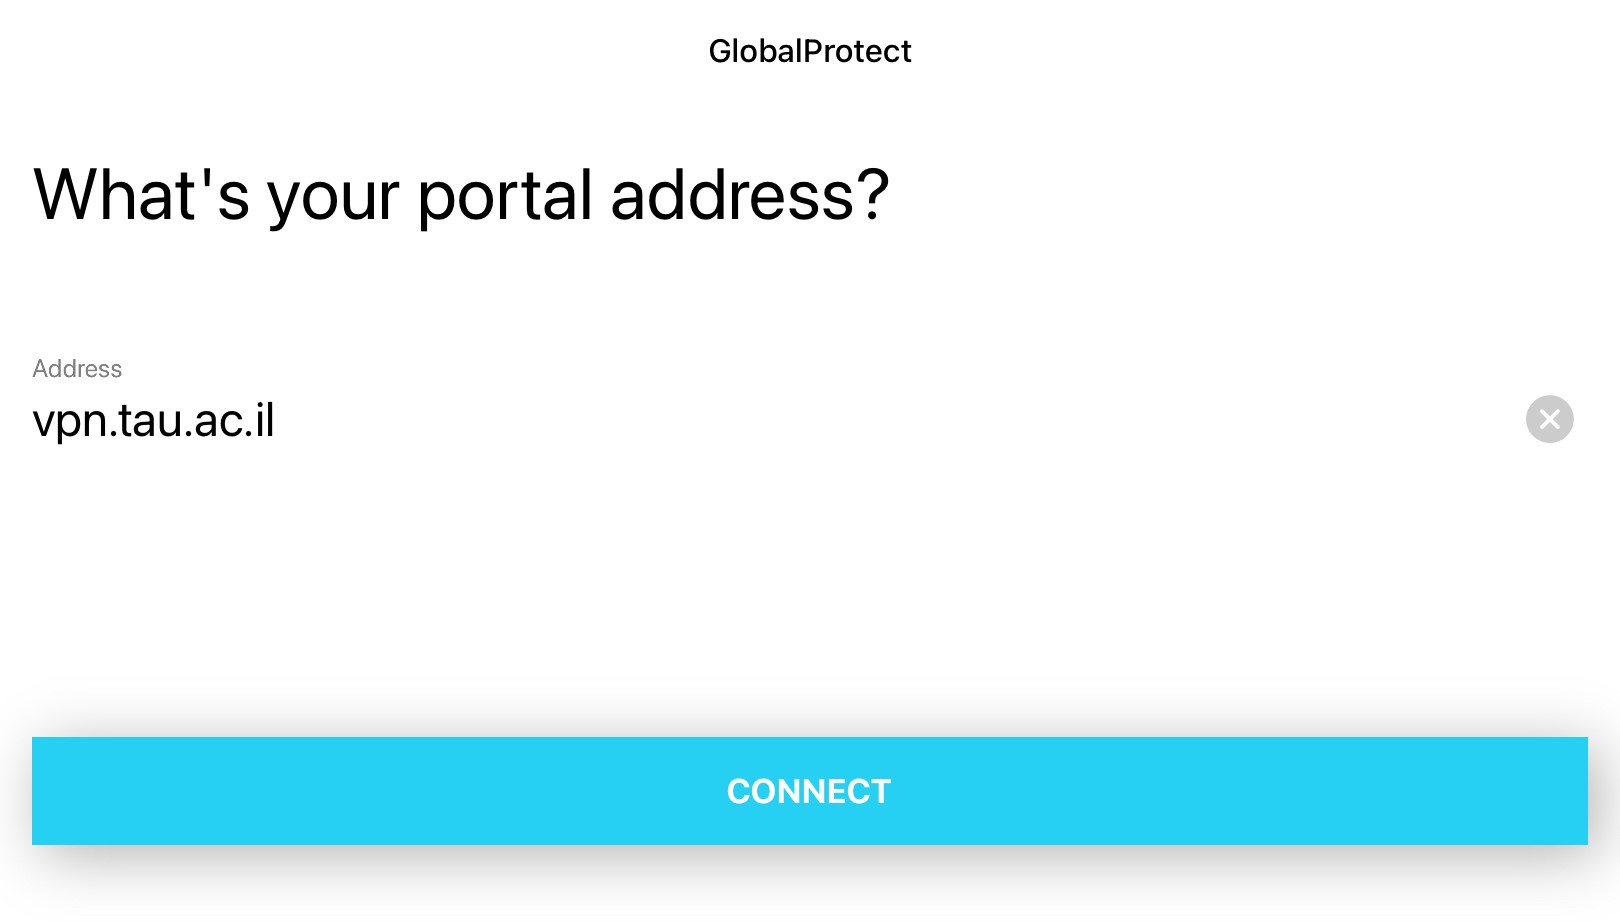 Enter the vpn address and tap connect